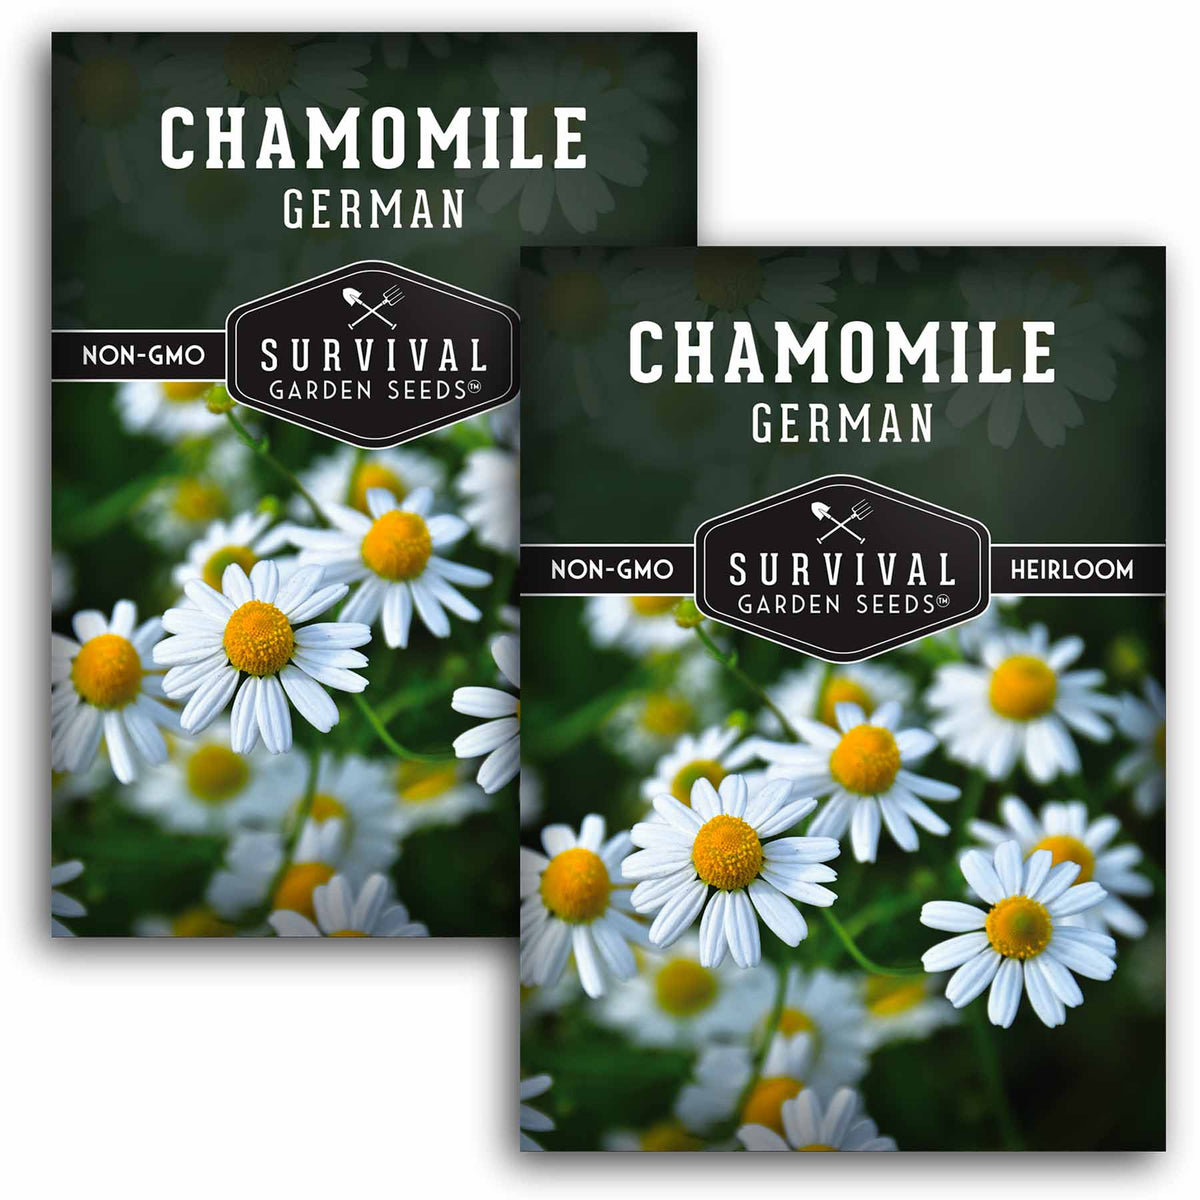 2 packets of German Chamomile seeds